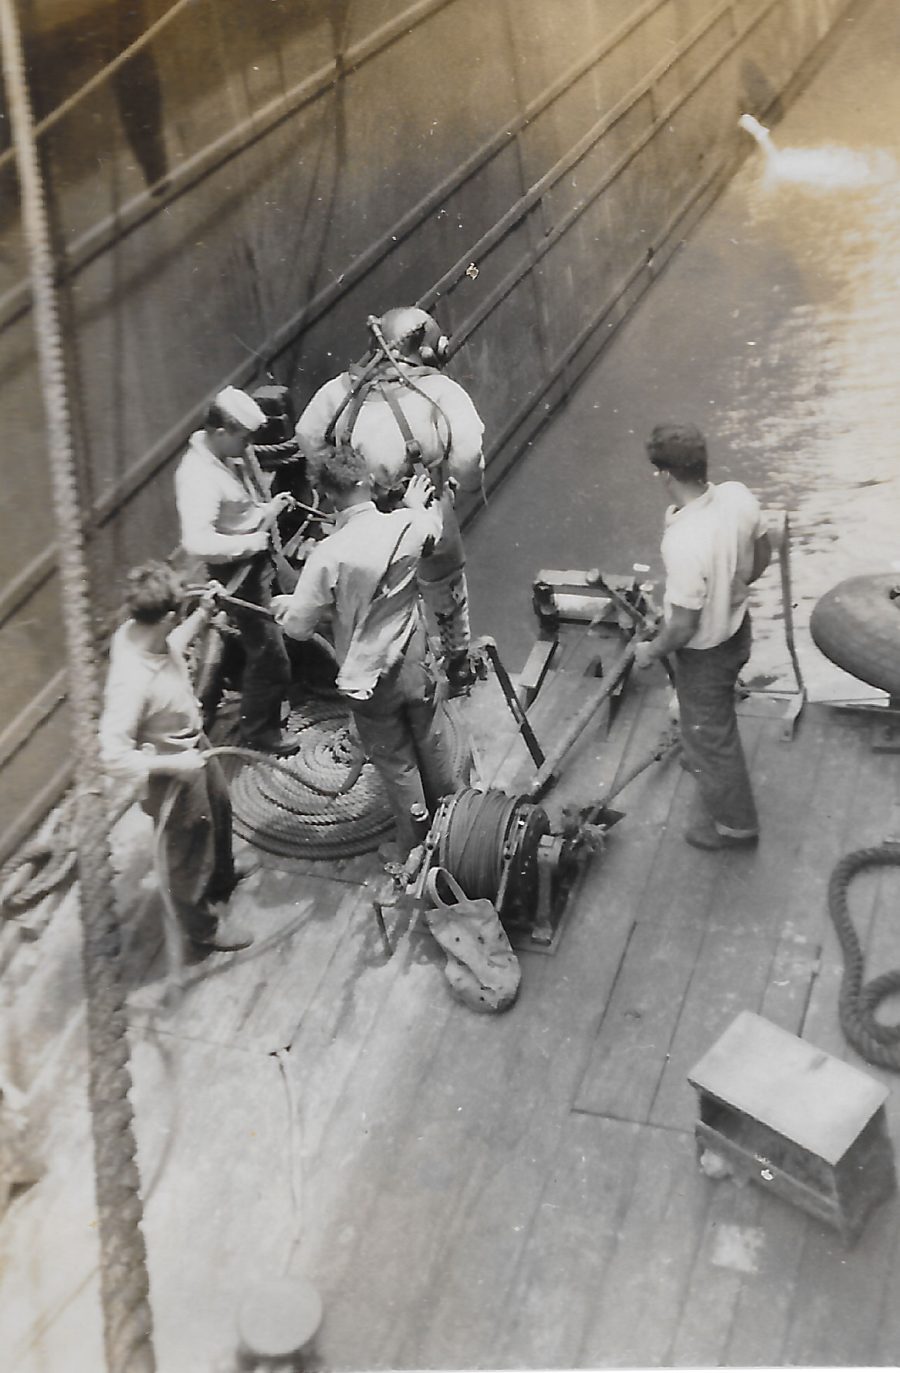 Diving for movie film in 40 ft of water during WWII. Photo taken by Bradley Piper or Renee Neuman.